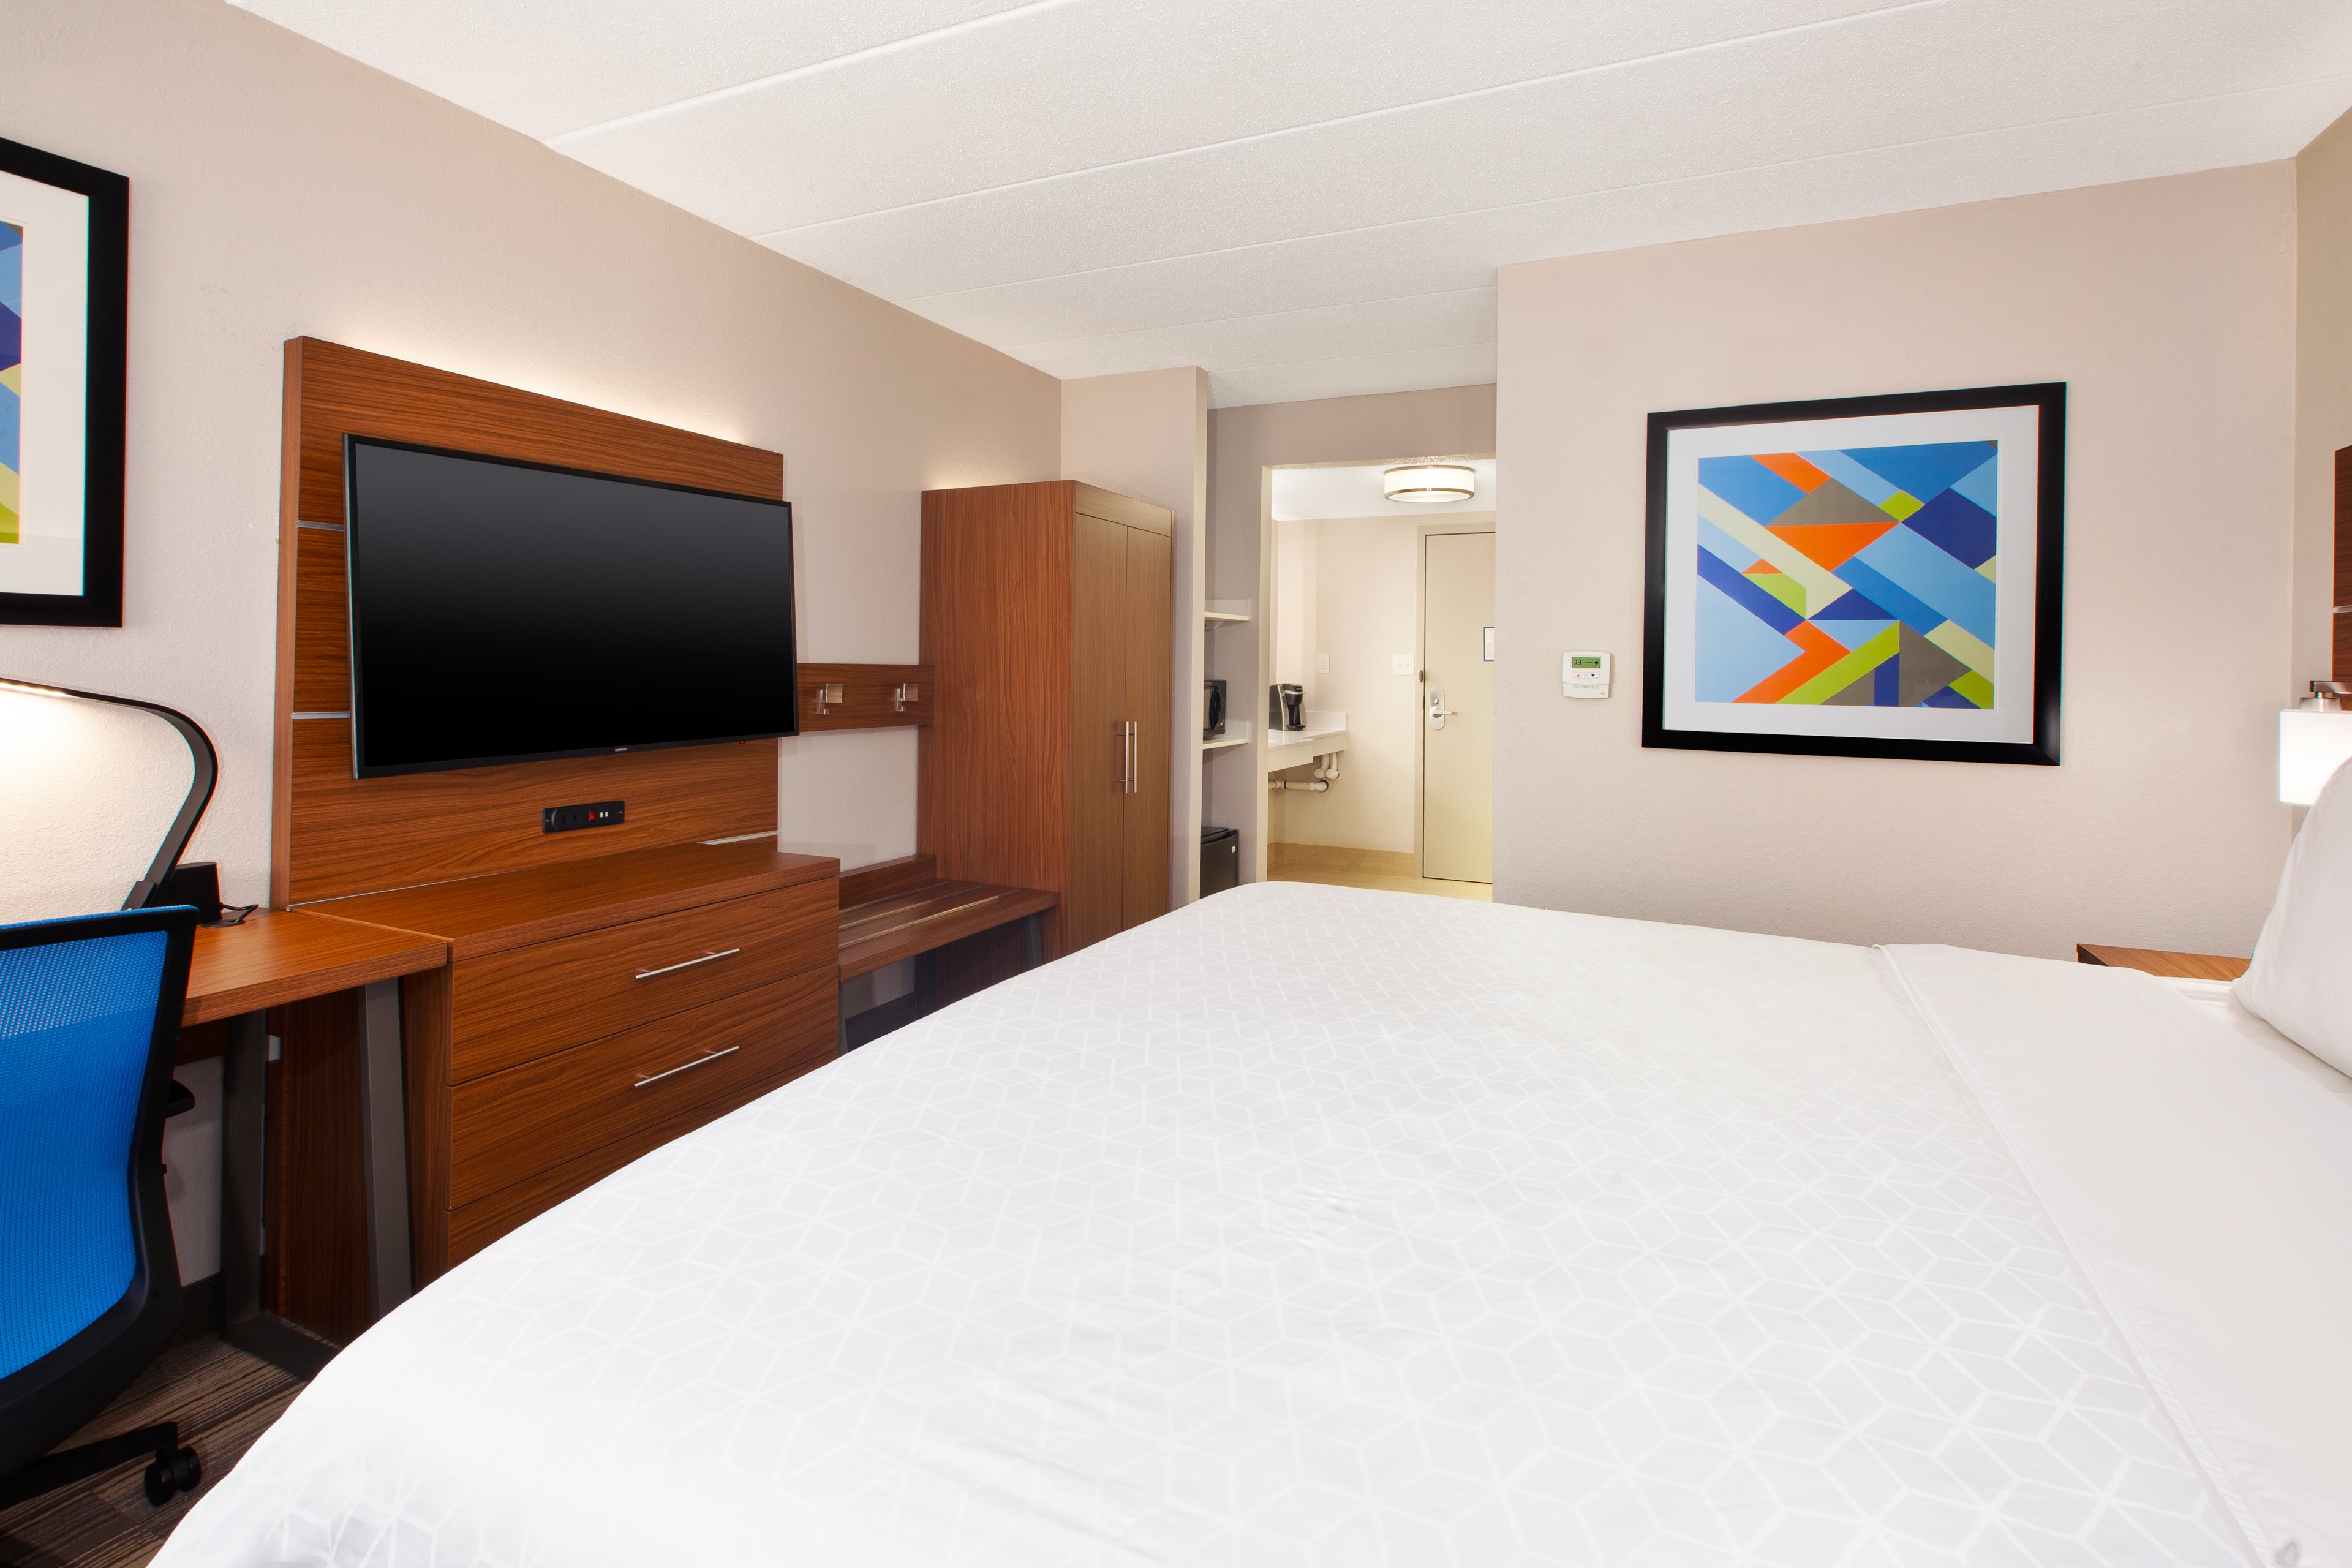 Our rooms are designed for corporate and leisure travelers alike.